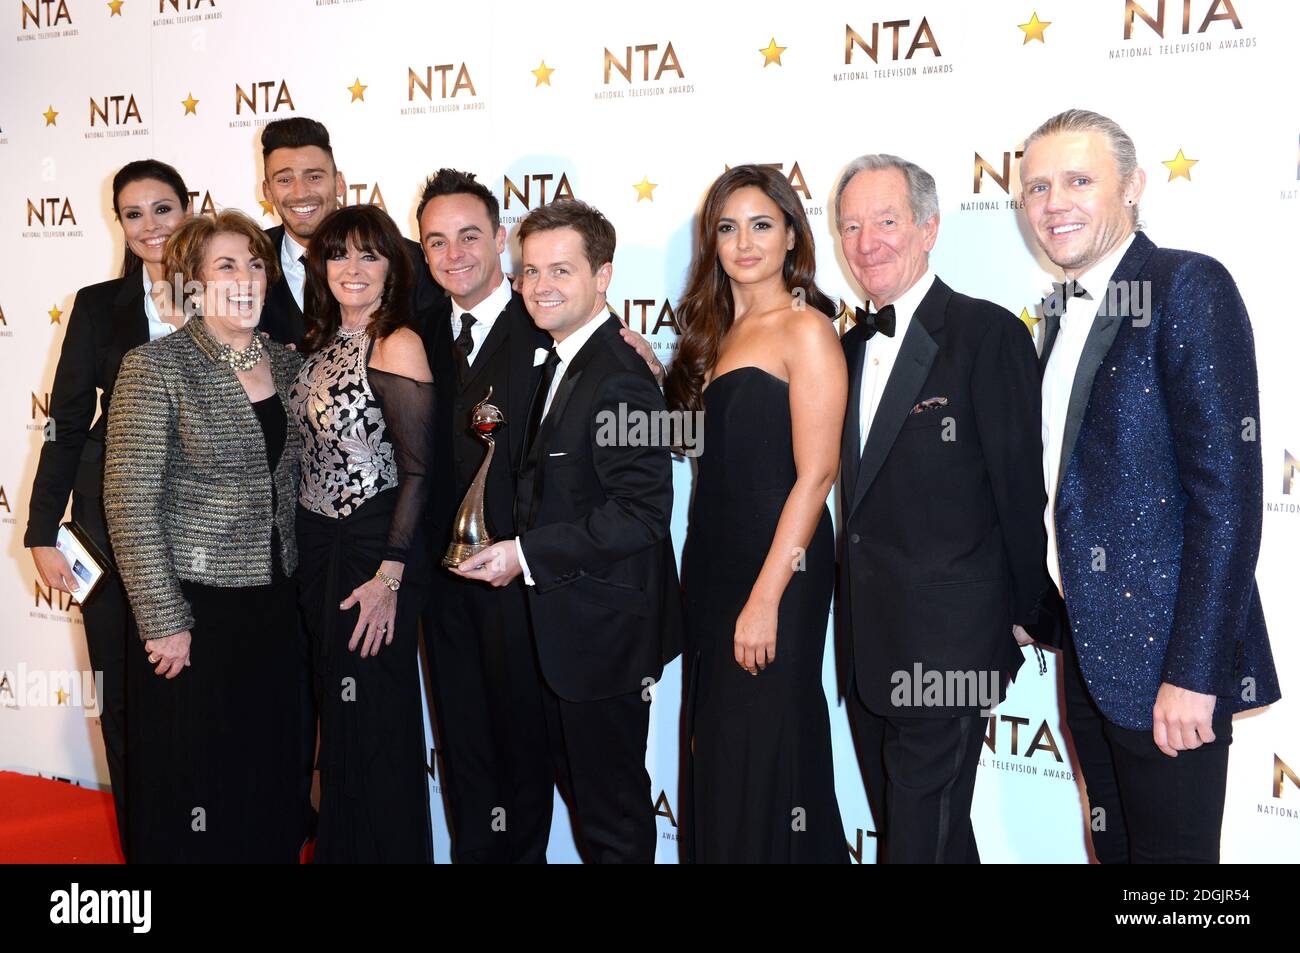 Ant and Dec (I'm A Celebrity) with Melanie Sykes, Edwina Currie, Jake Quickenden, Vikki Michelle, Nadia Forde, Michael Buerk and Jimmy Bullard with the award for Best Entertainment Programme in the press room at the National Television Awards 2015, held at the O2 Arena, London  This year the NTA's are celebrating their 20th year. Stock Photo